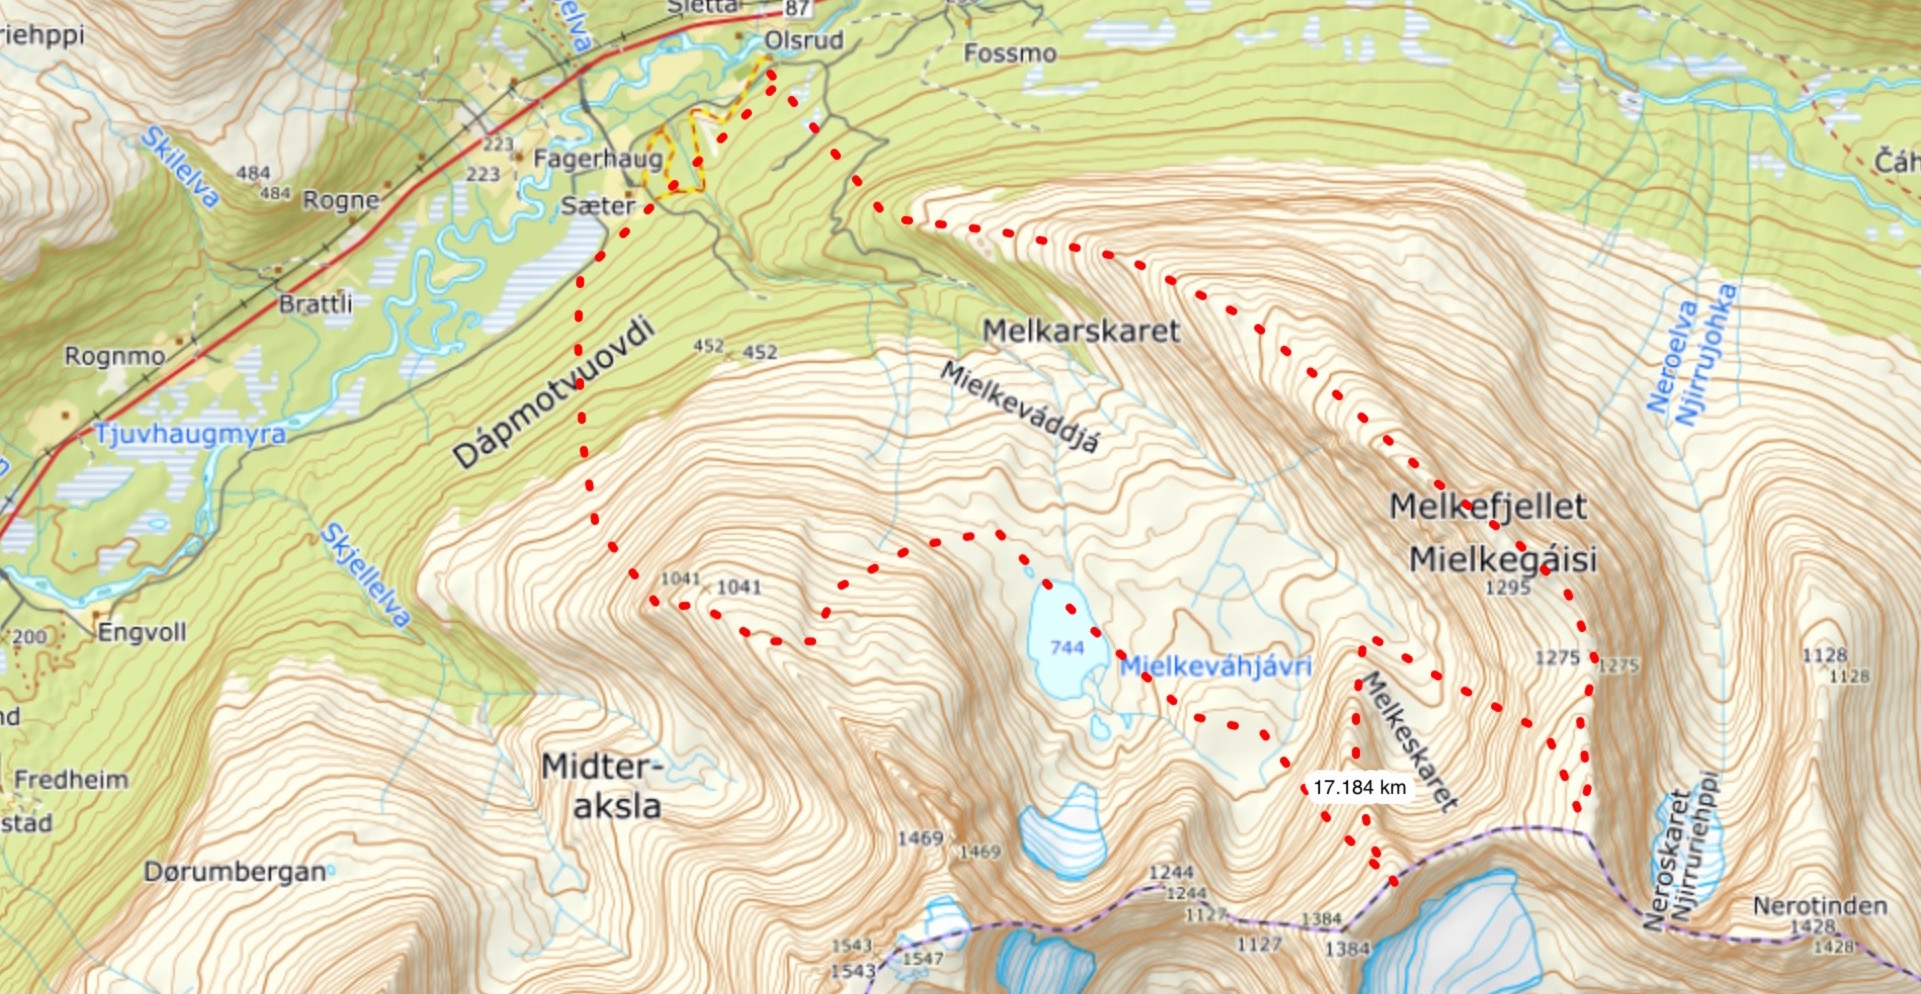 Topographical map of Melkefjellet and Istinden Ridge climbing route in Tamokdalen backcountry